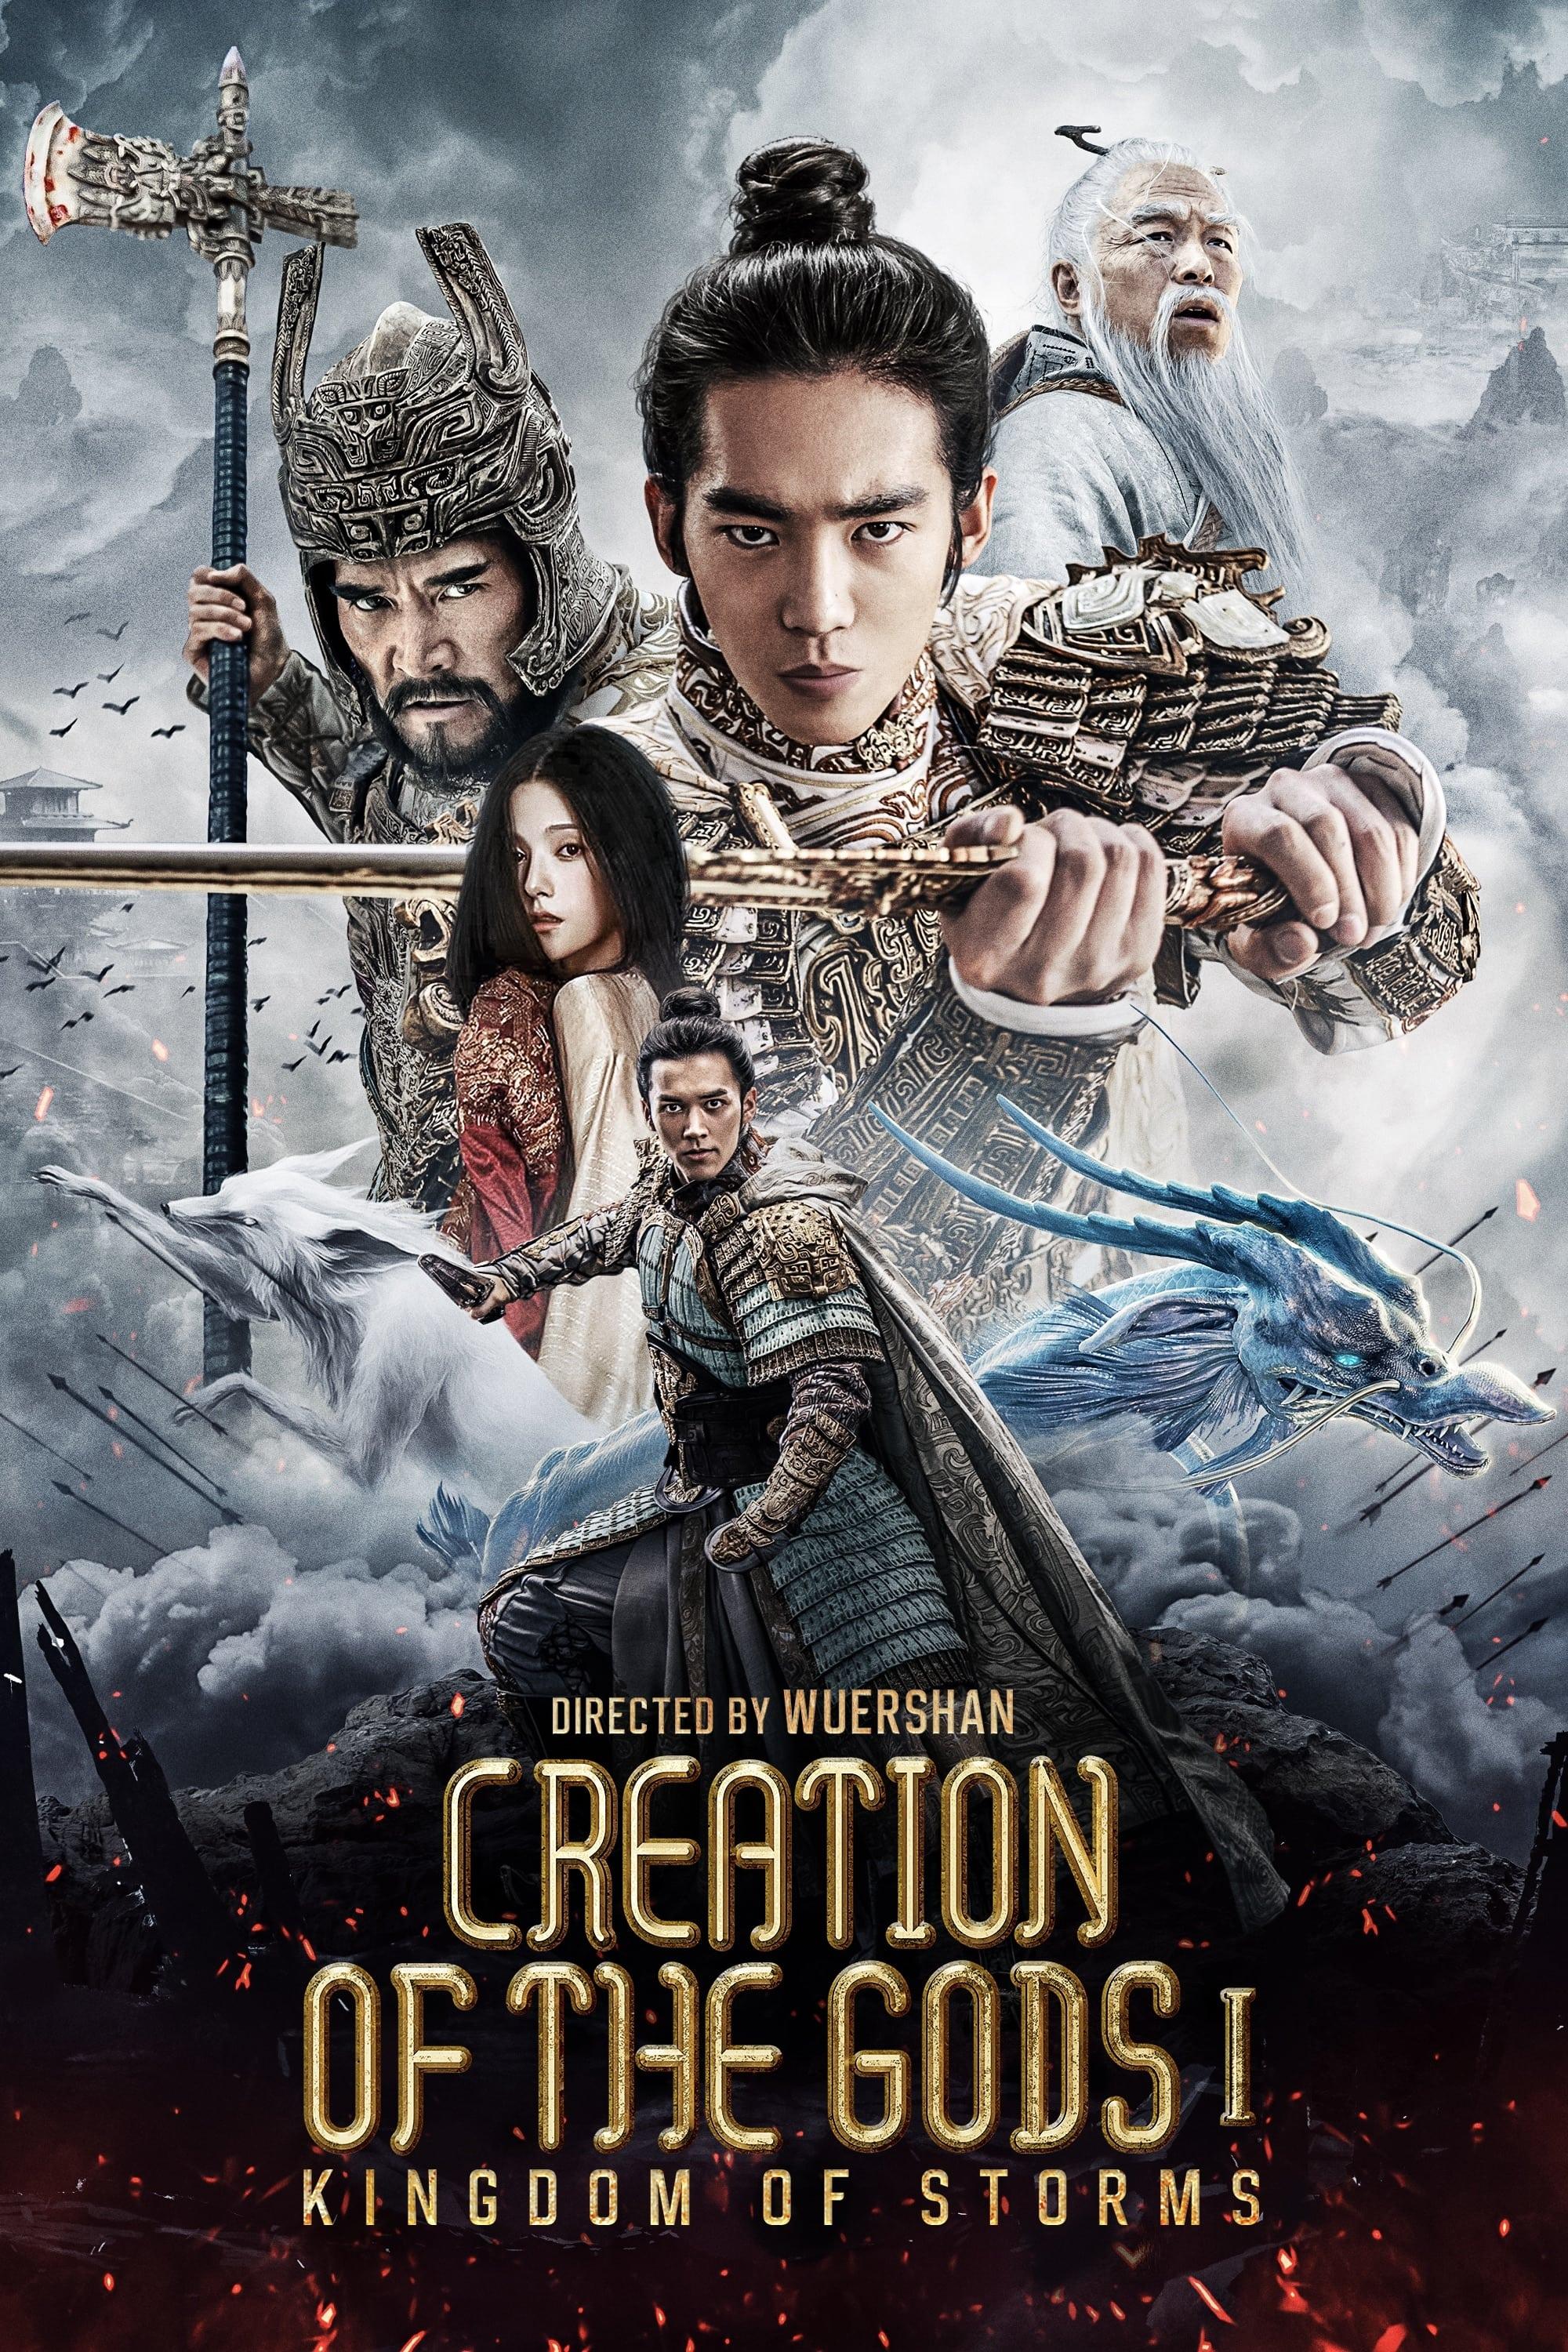 Movie poster of "Creation of the Gods I: Kingdom of Storms"